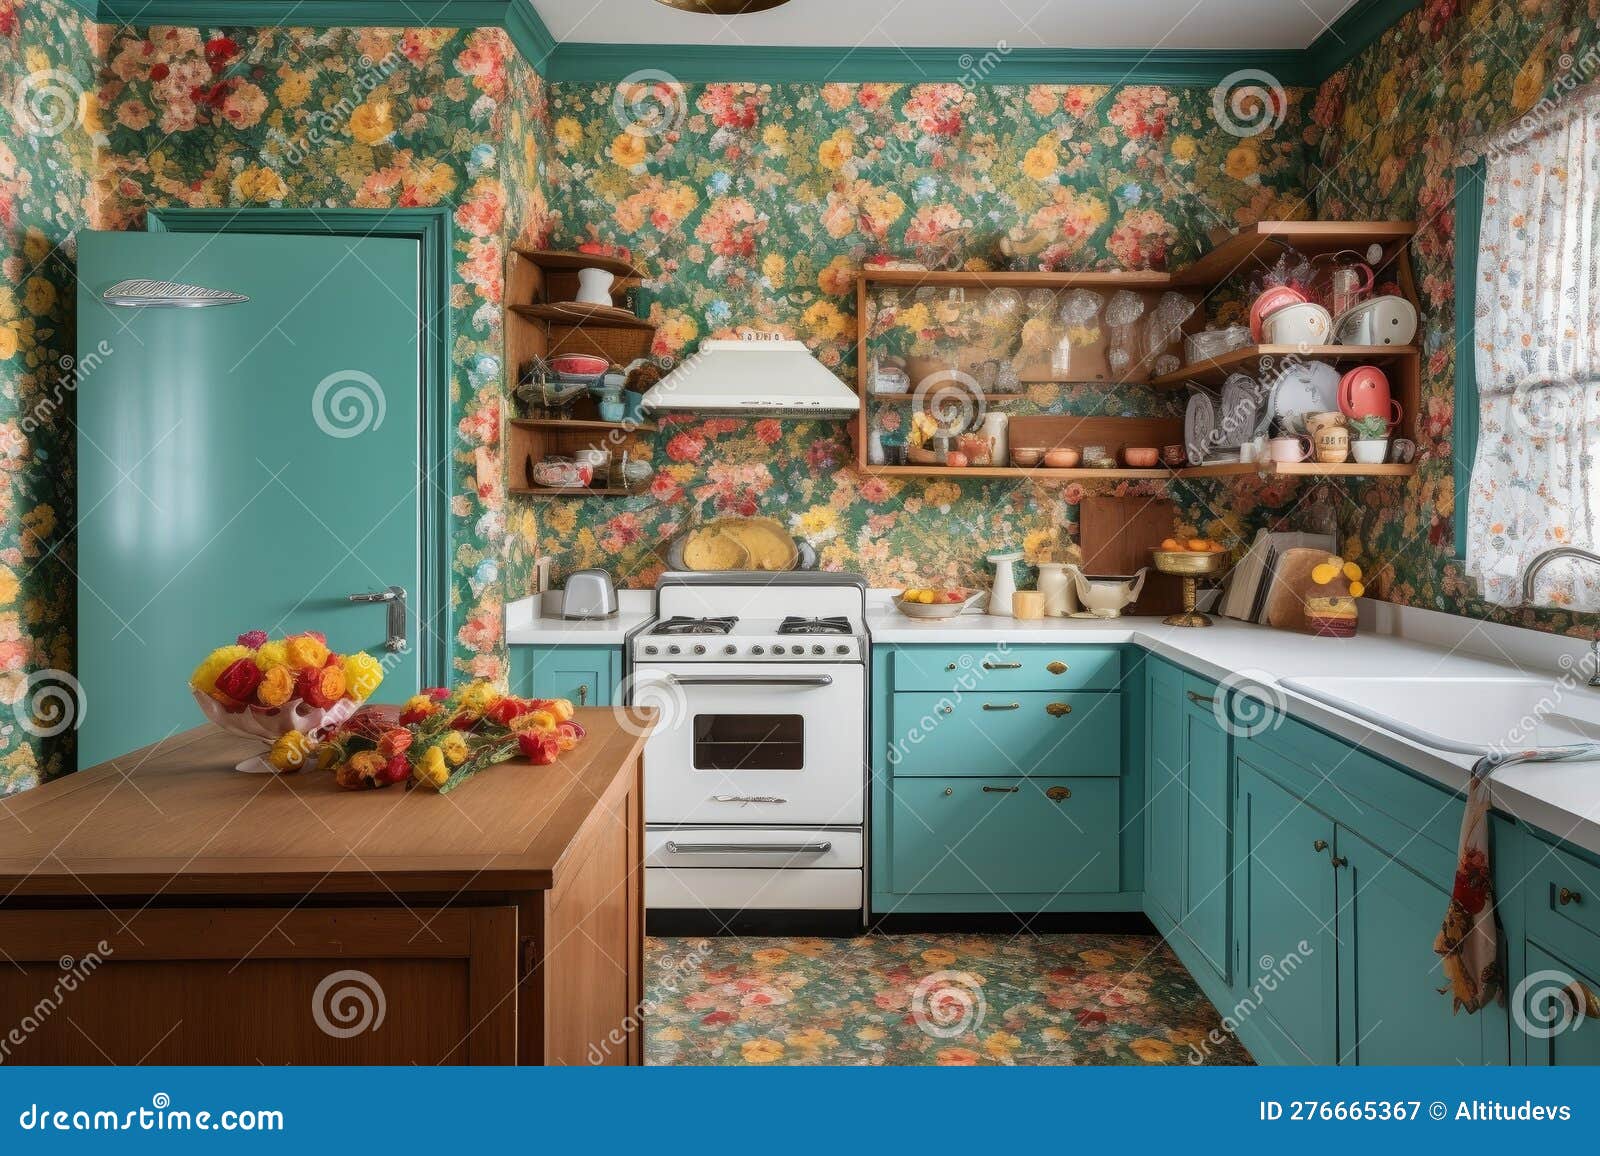 25 Cool Retro Kitchens  How to Decorate a Kitchen in Throwback Style